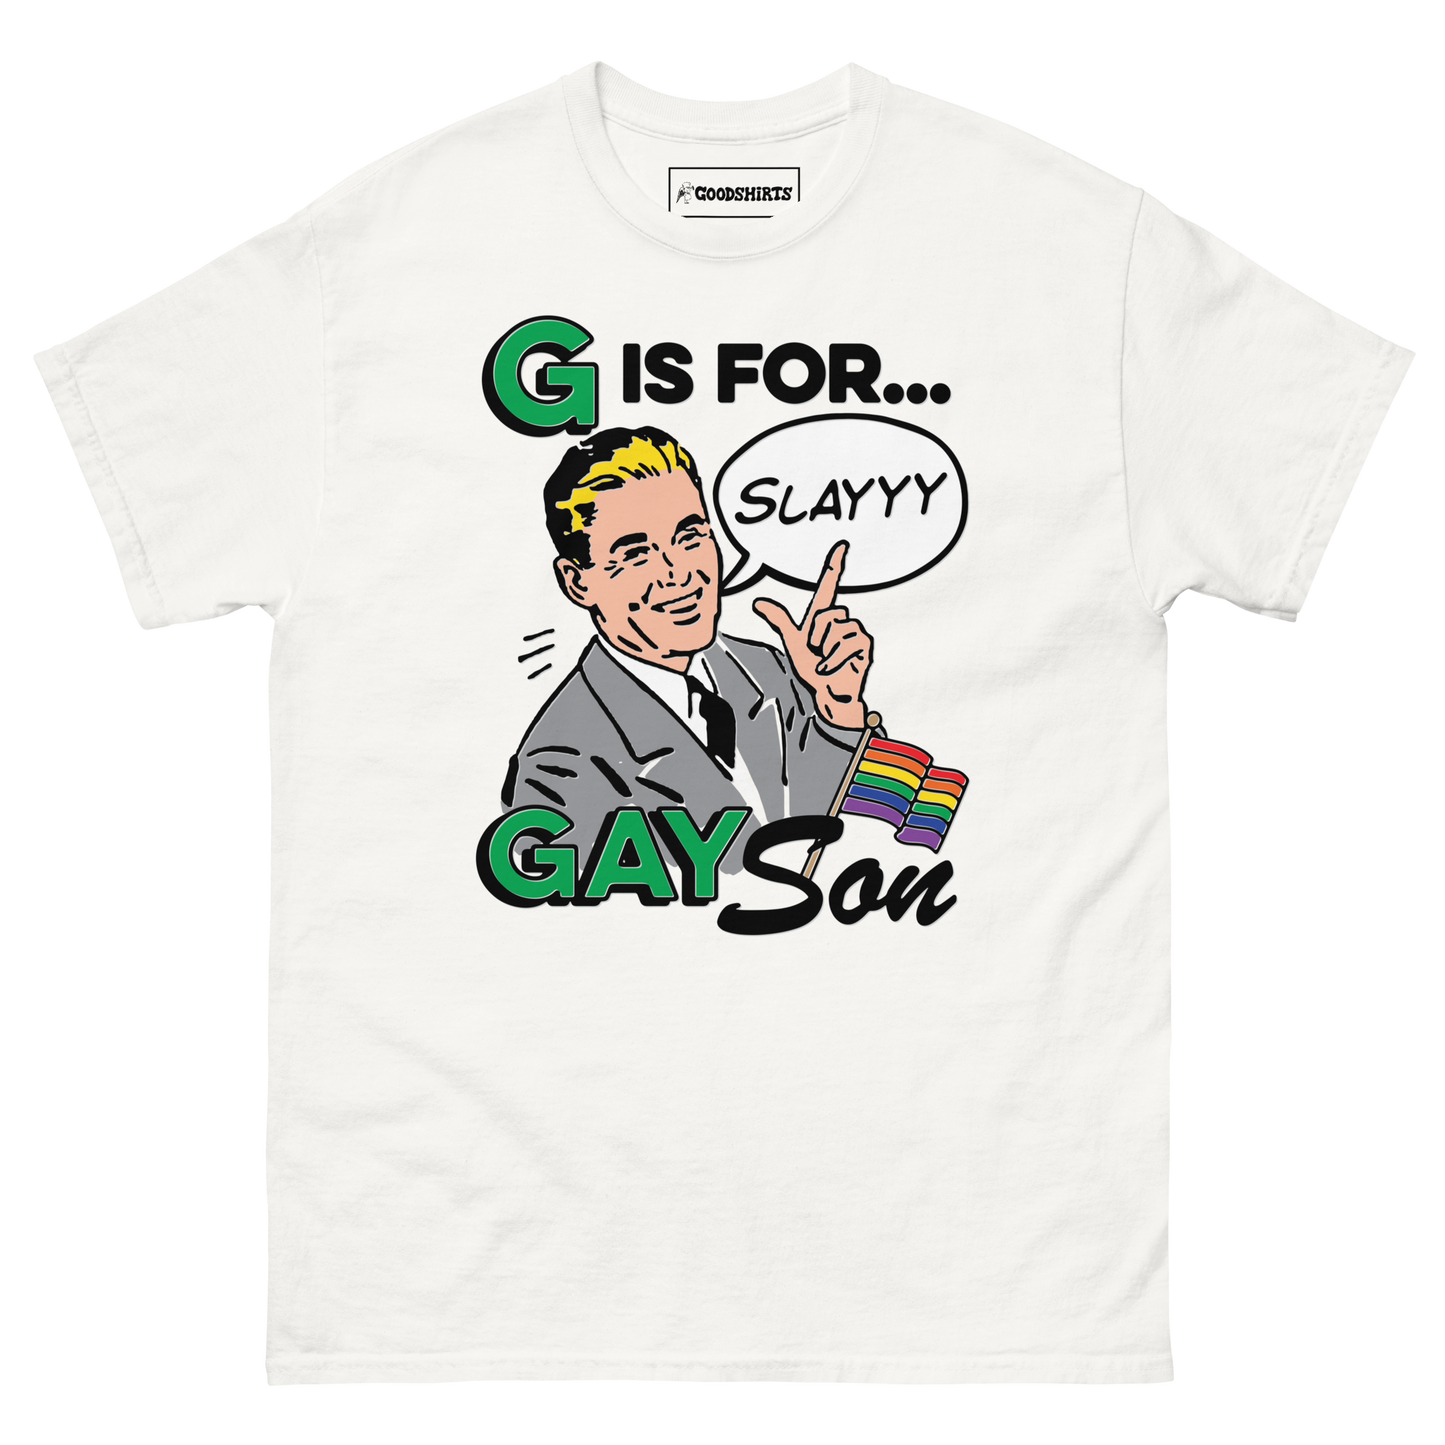 G Is For Gay Son.